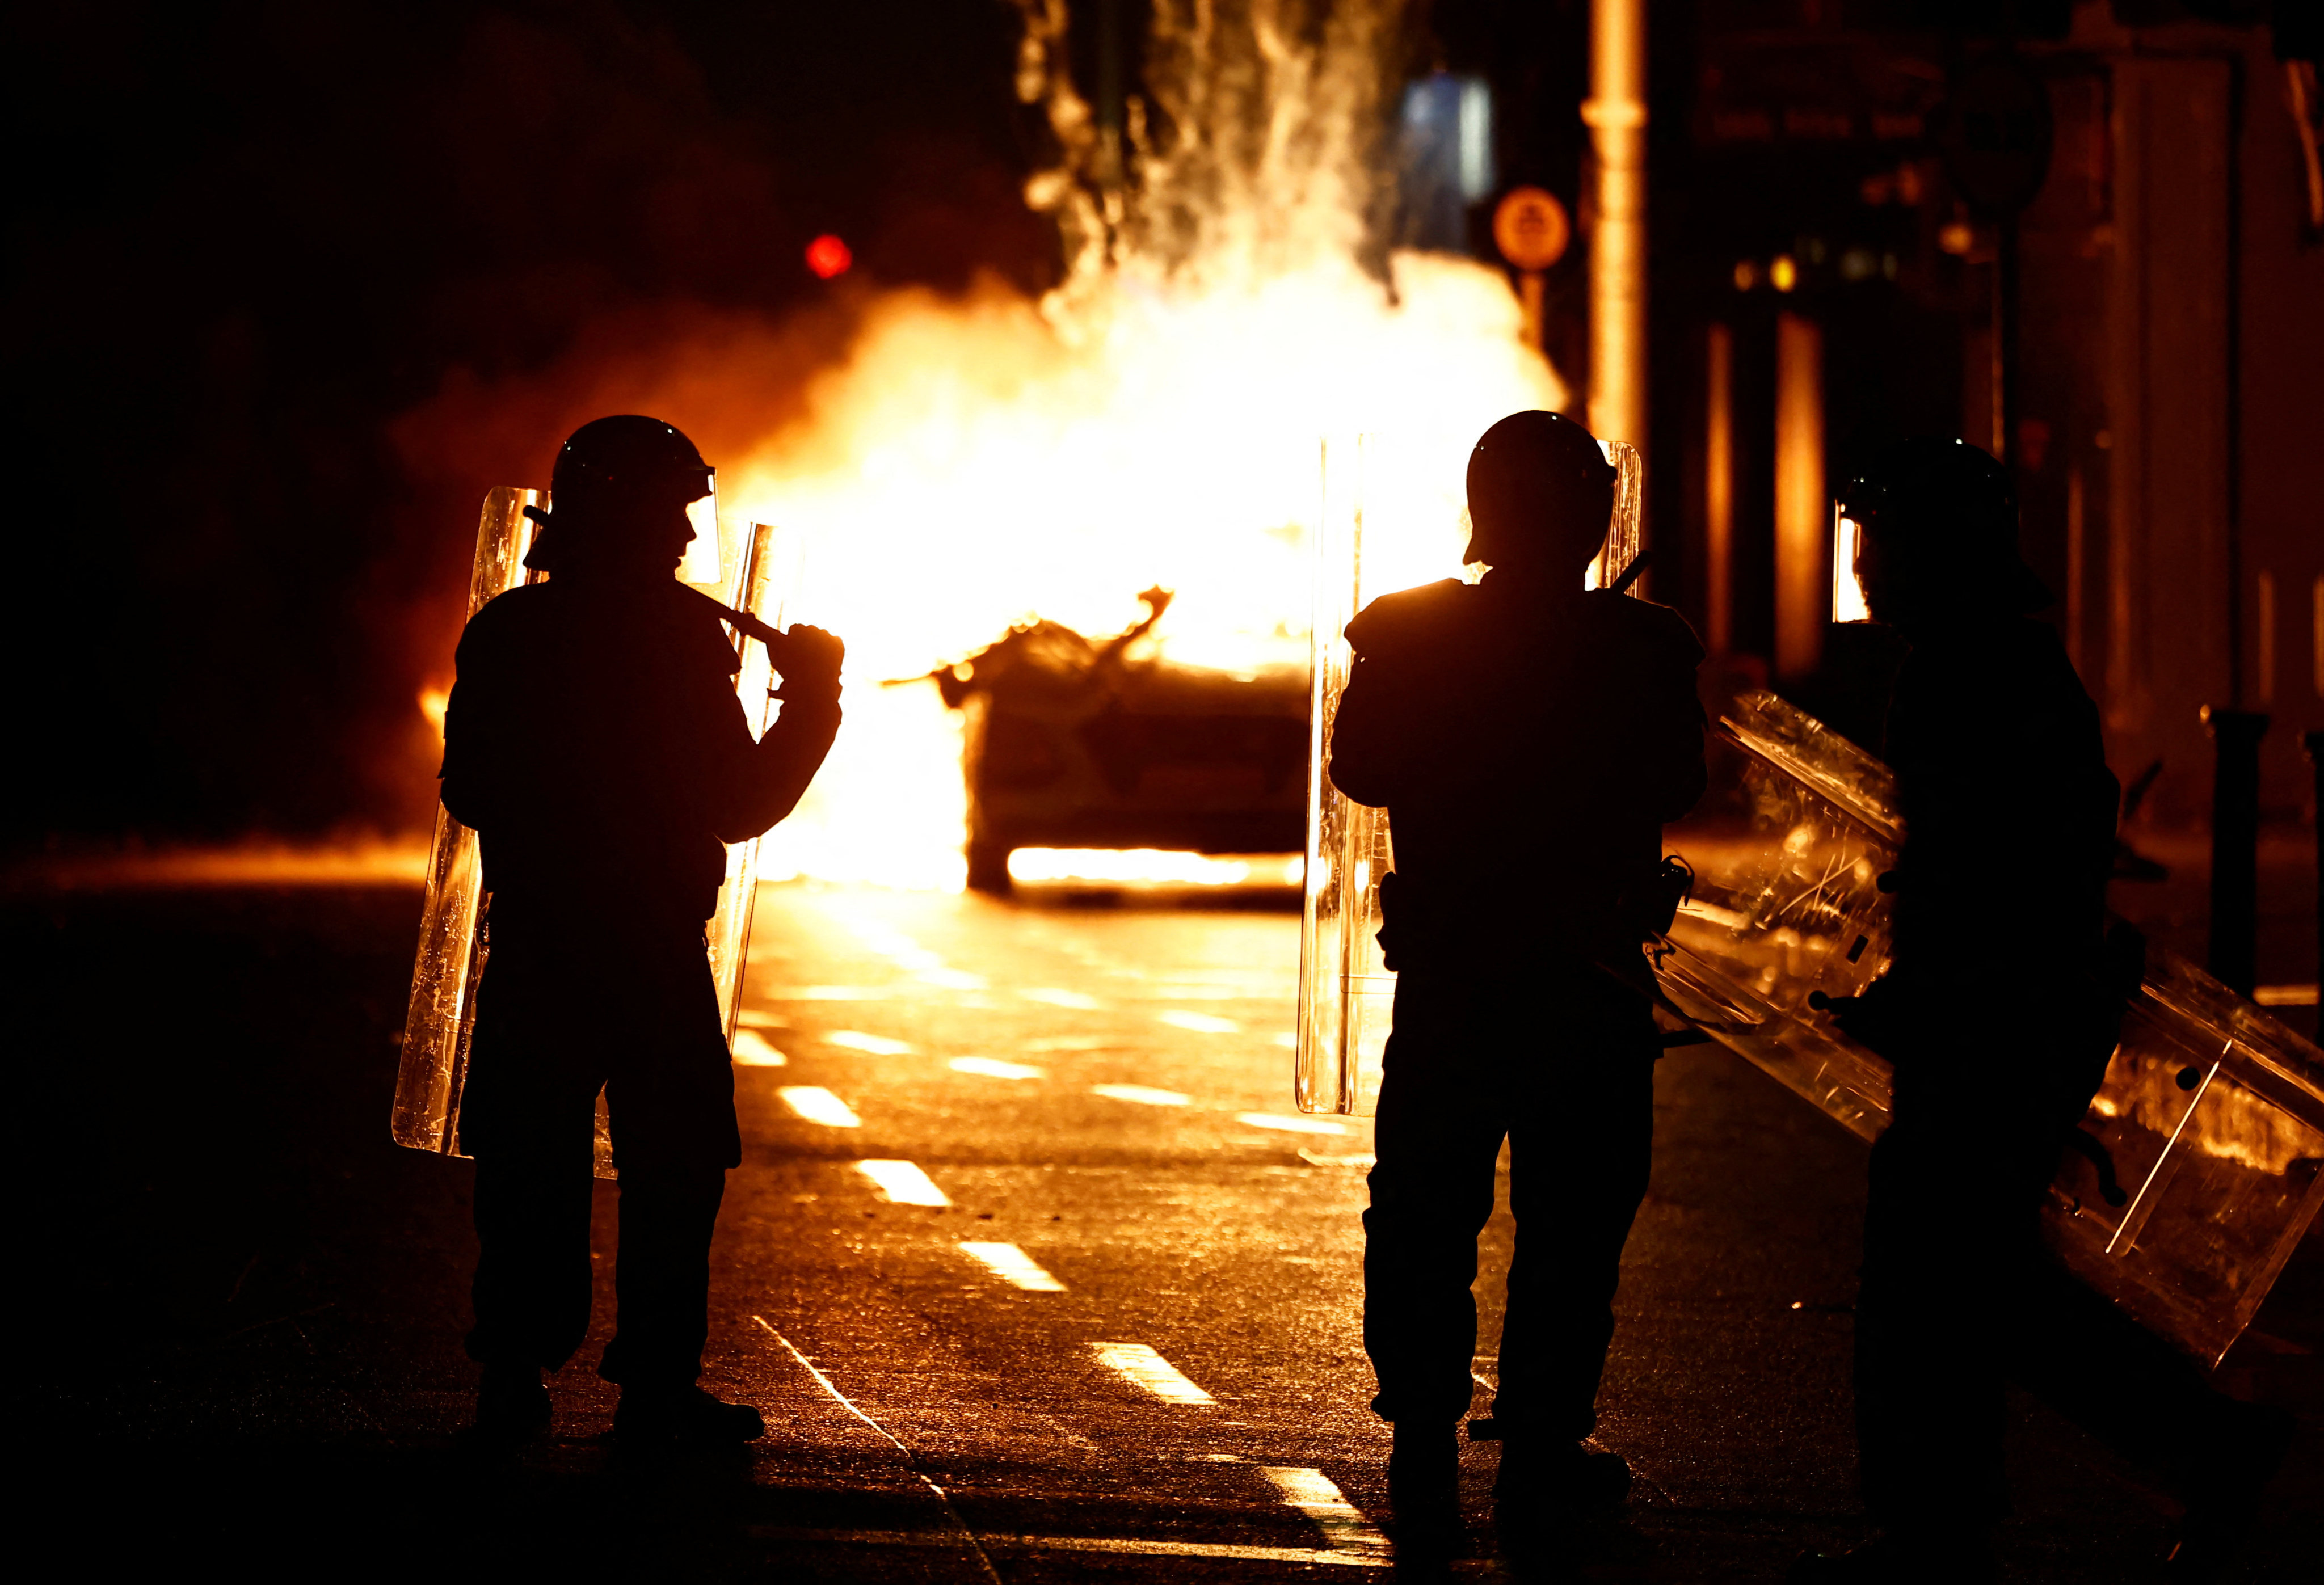 Riot police stand next to a burning police vehicle in Dublin, Ireland on Thursday. Photo: Reuters